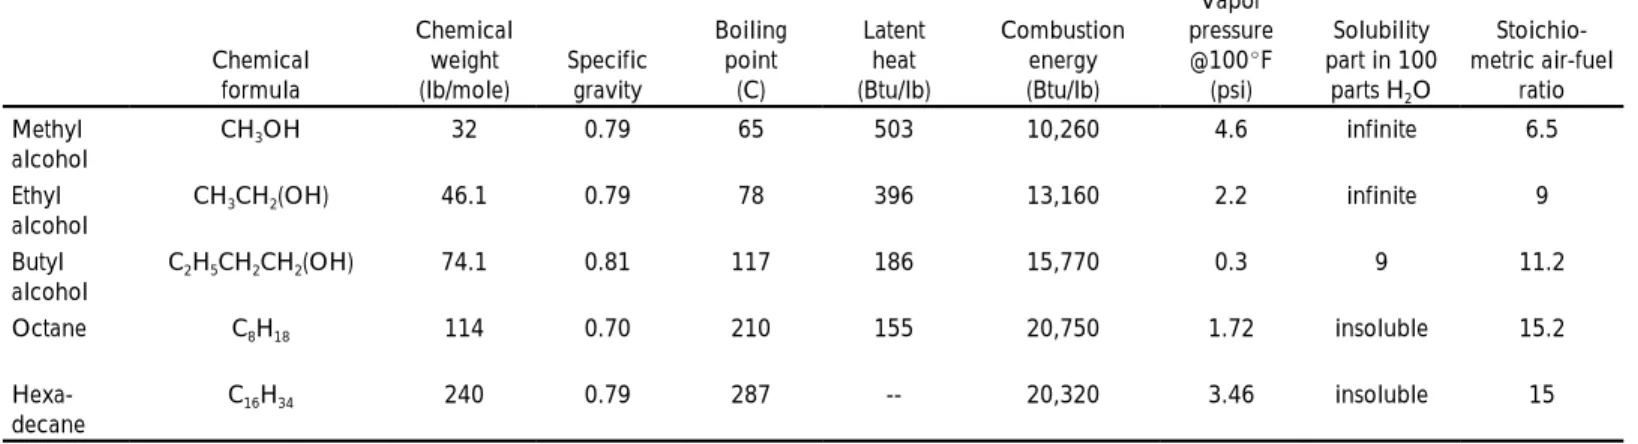 Table 1: Characteristics of chemically pure fuels.*